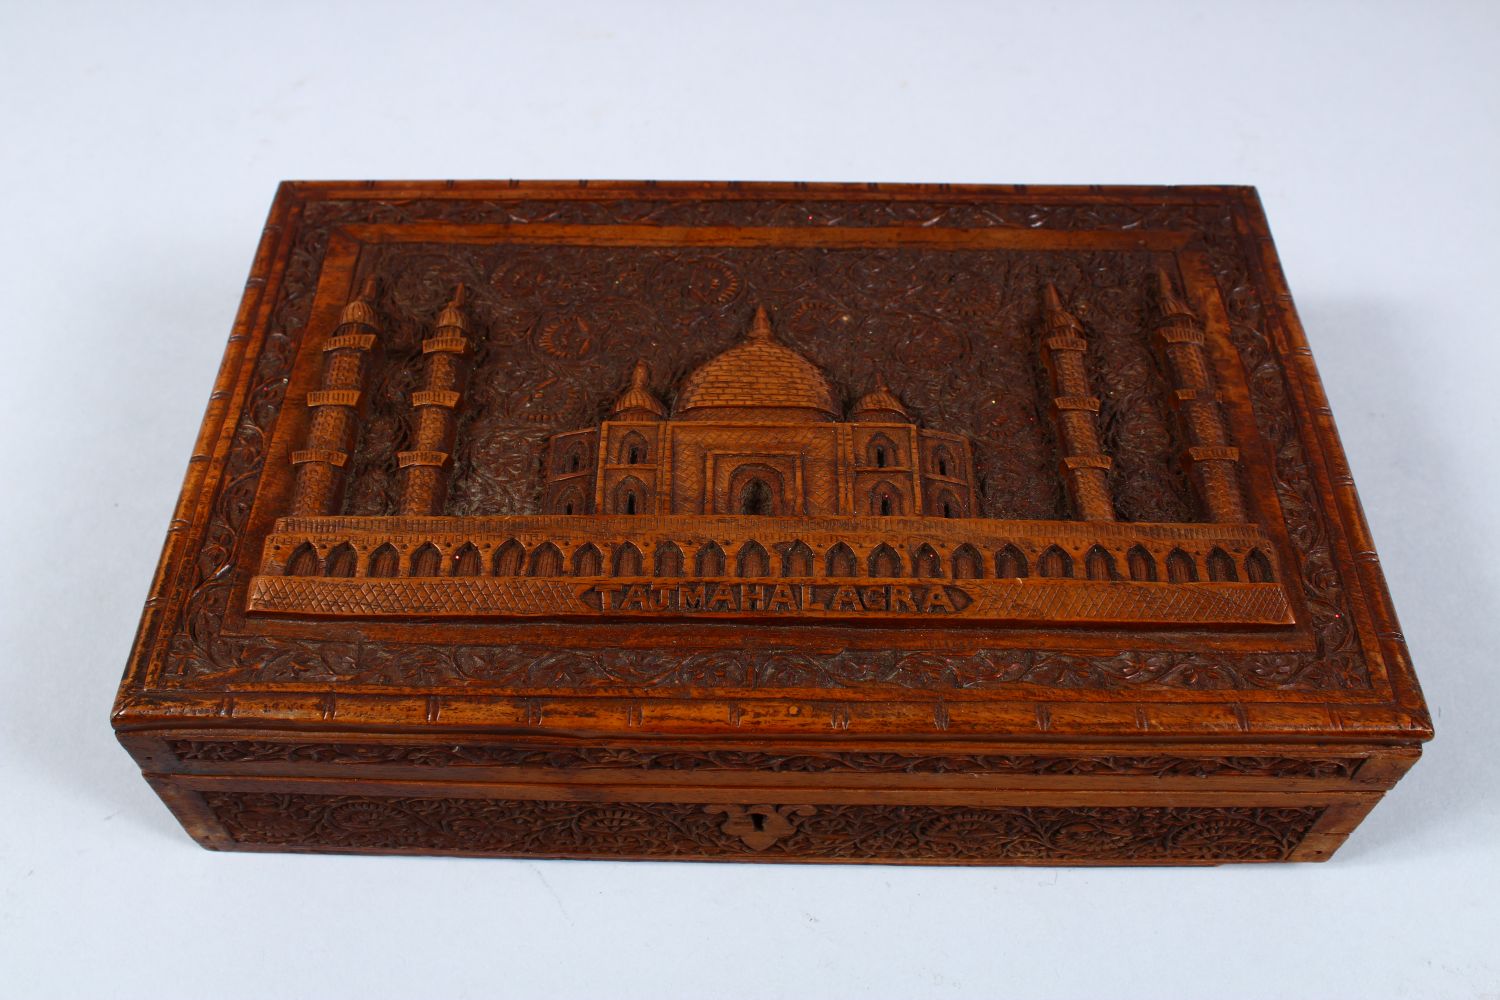 A GOOD INDIAN CARVED HARDWOOD LIDDED BOX, carved in relief to depict the scenes of a temple - Image 2 of 5